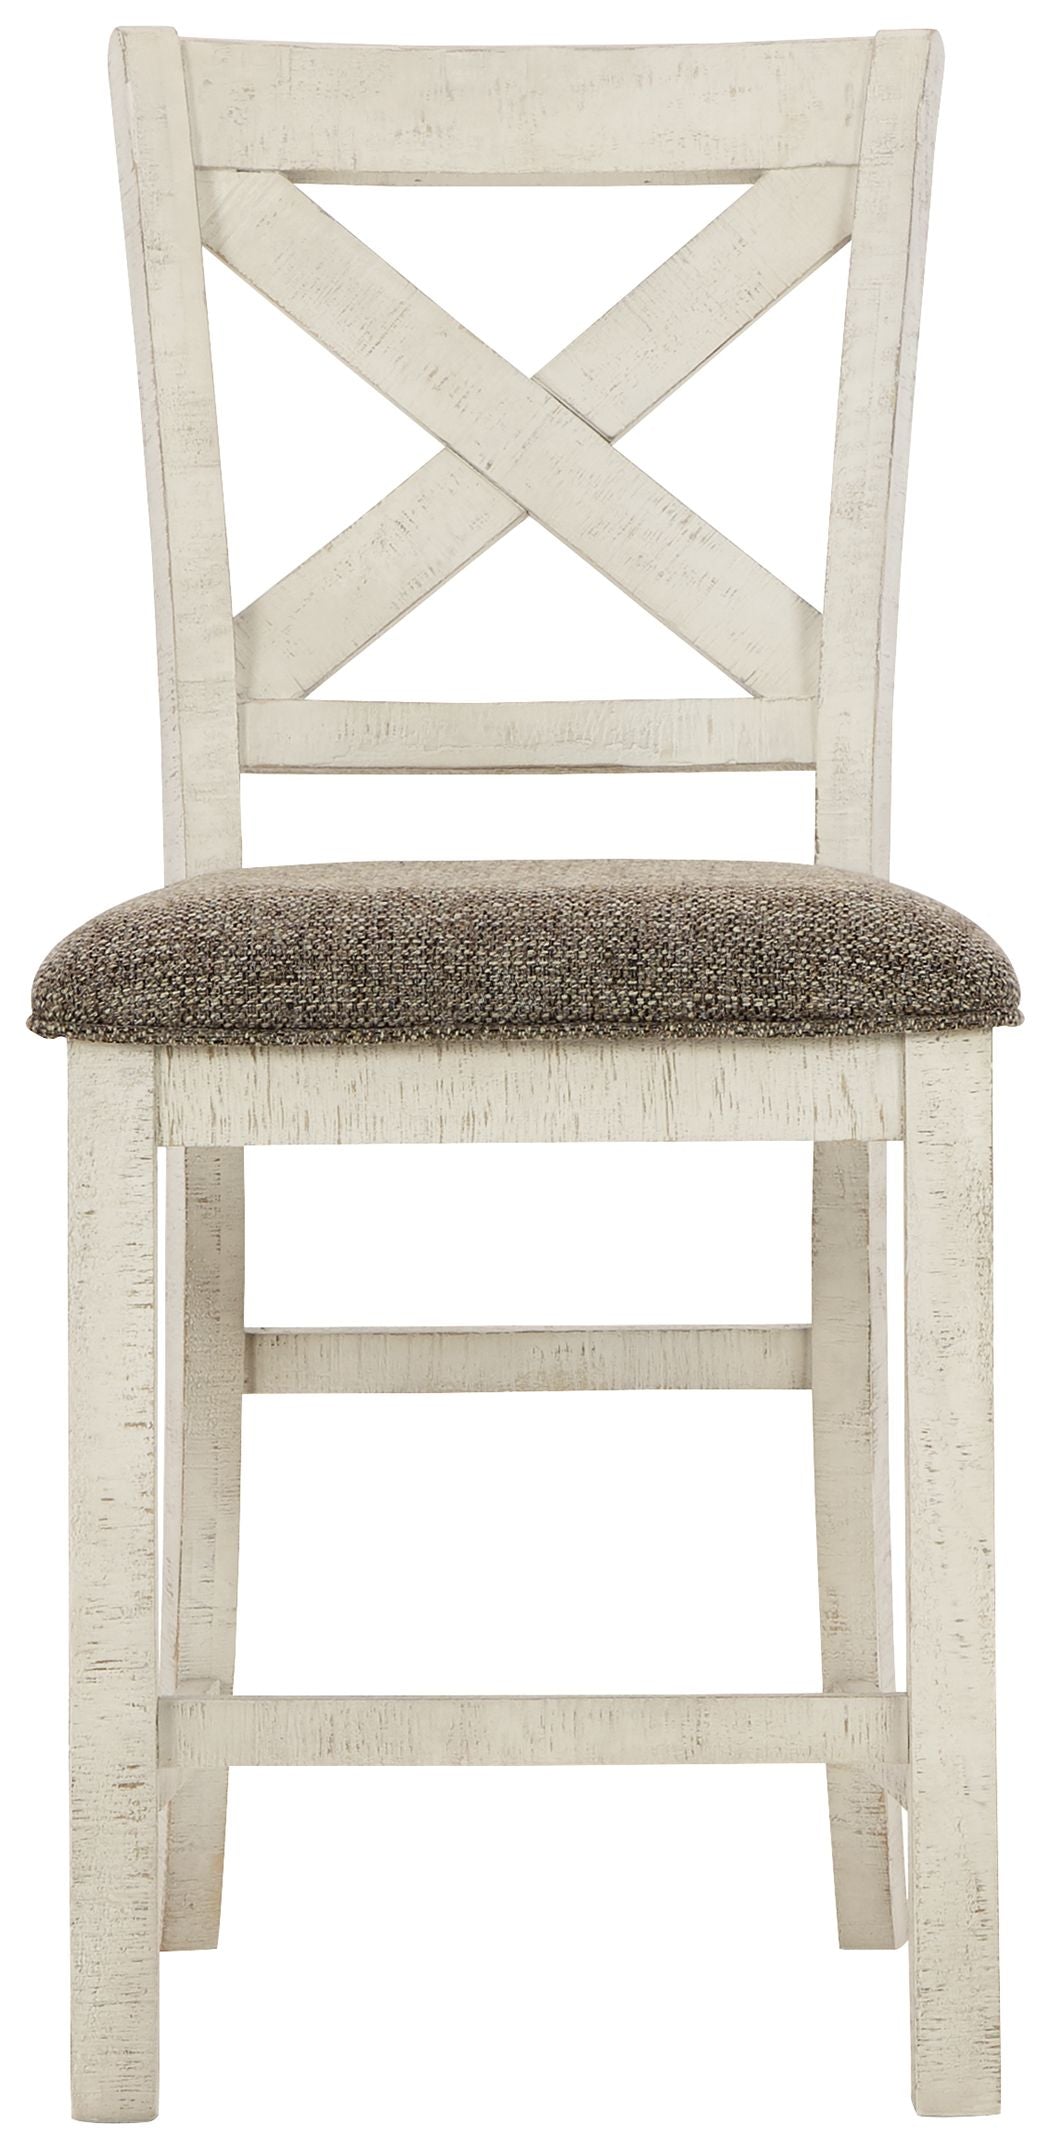 Brewgan - Two-tone - Upholstered Barstool (Set of 2)